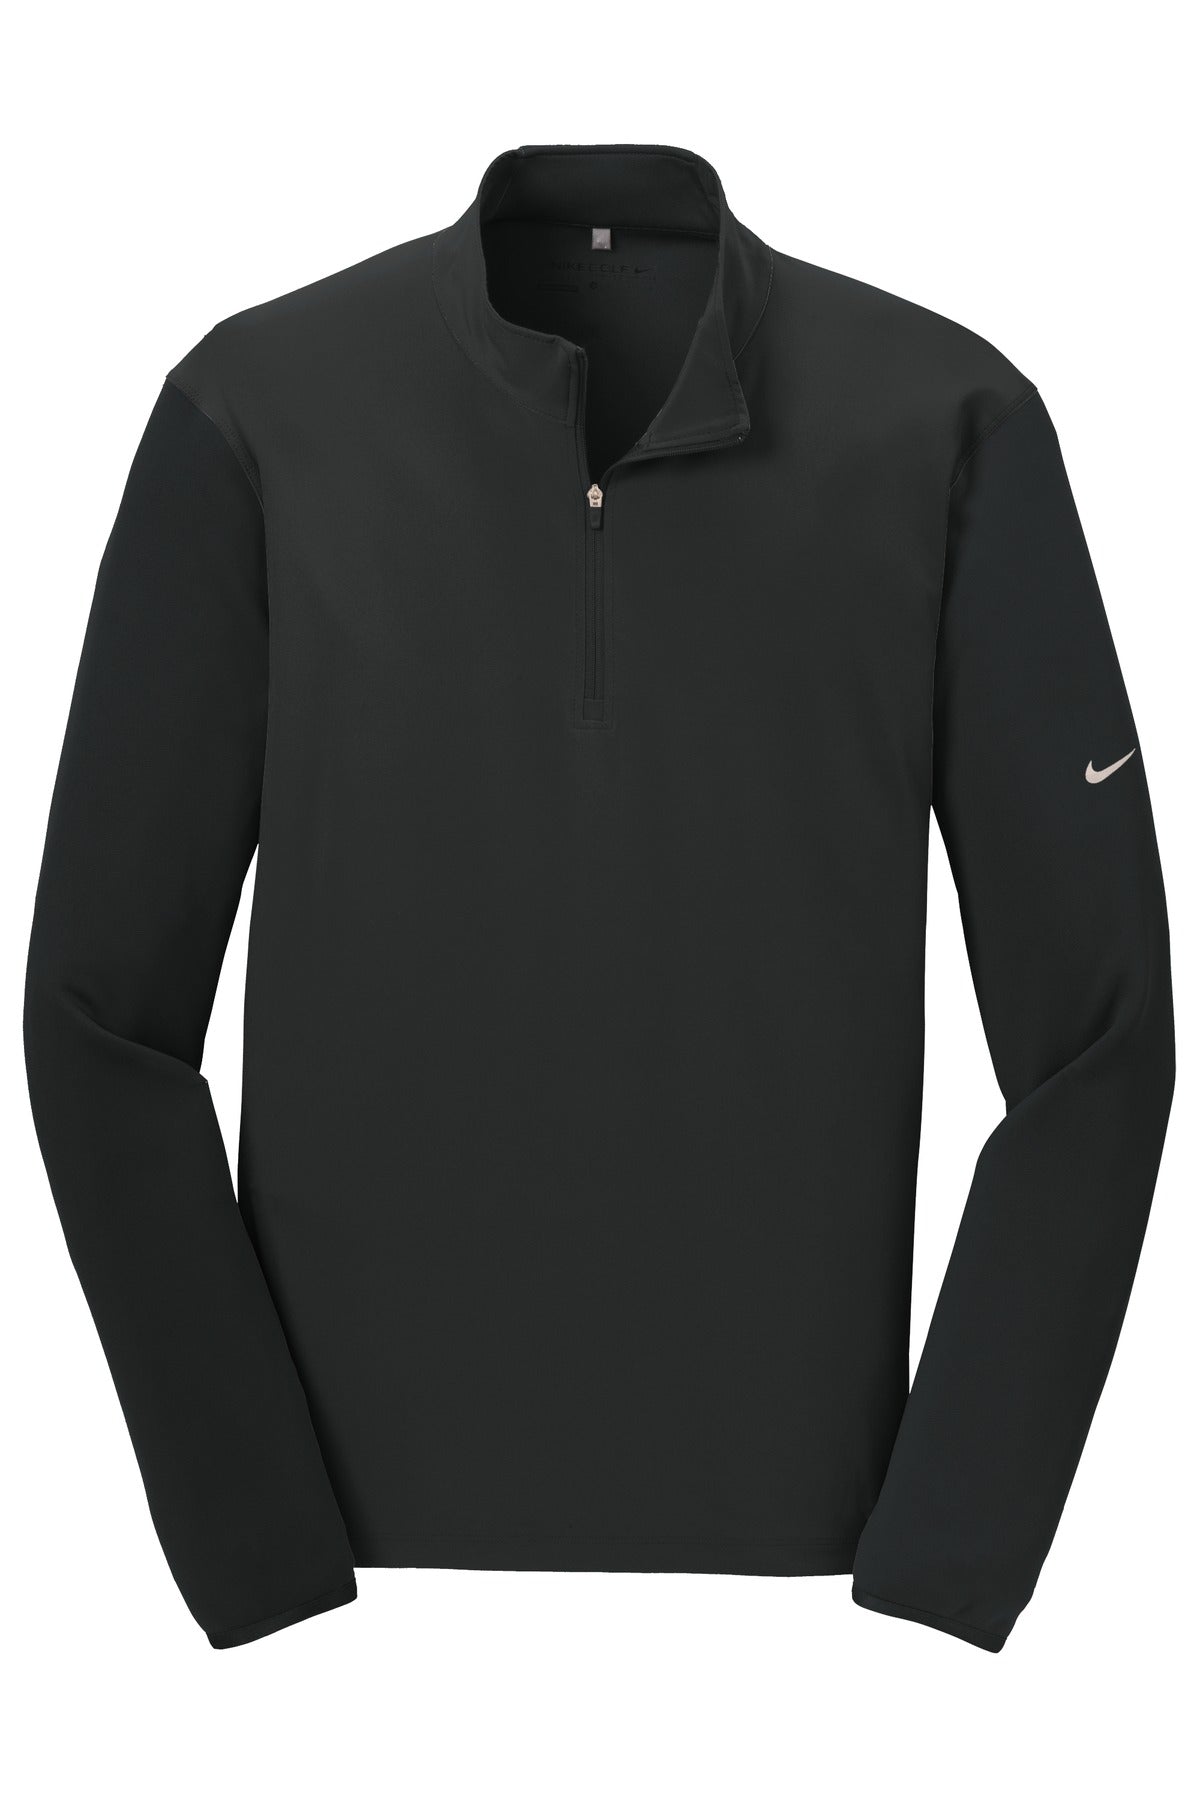 Nike Dri-FIT Fabric Mix 1/2-Zip Cover-Up. 746102